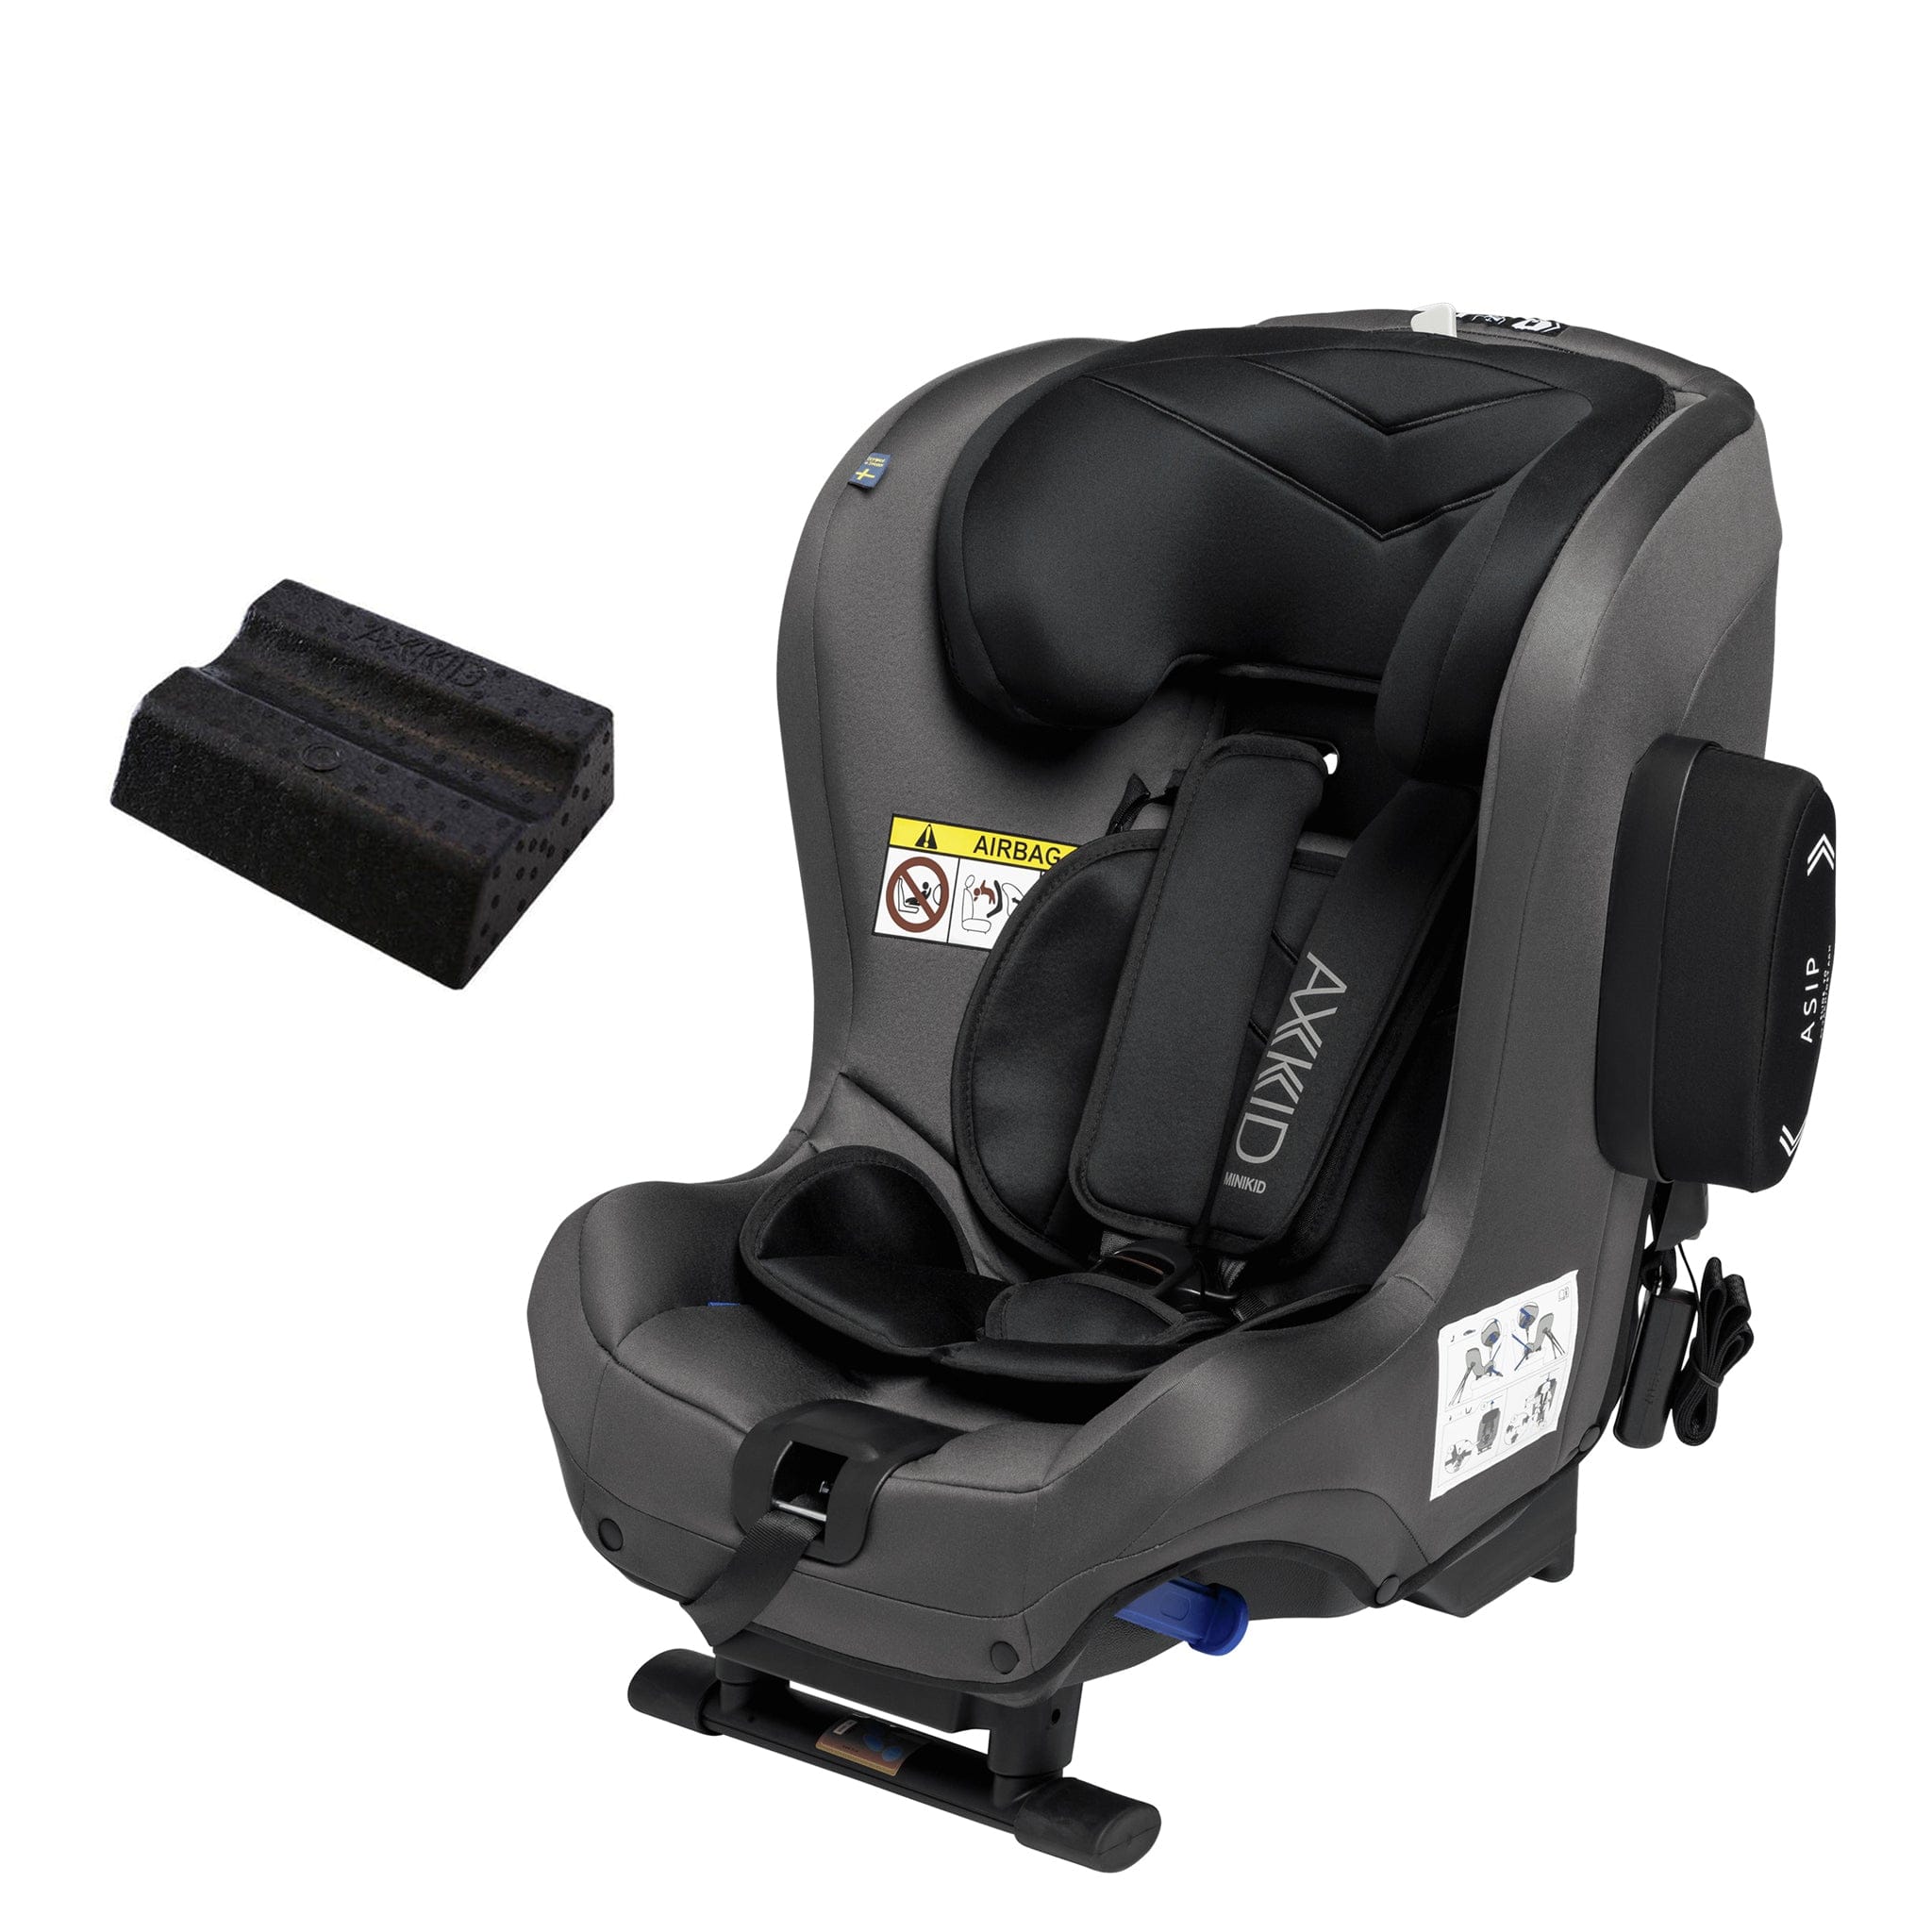 Axkid Minikid 2 - Granite With Free Wedge Extended Rear Facing Car Seats 10523-GRA 7350057585887